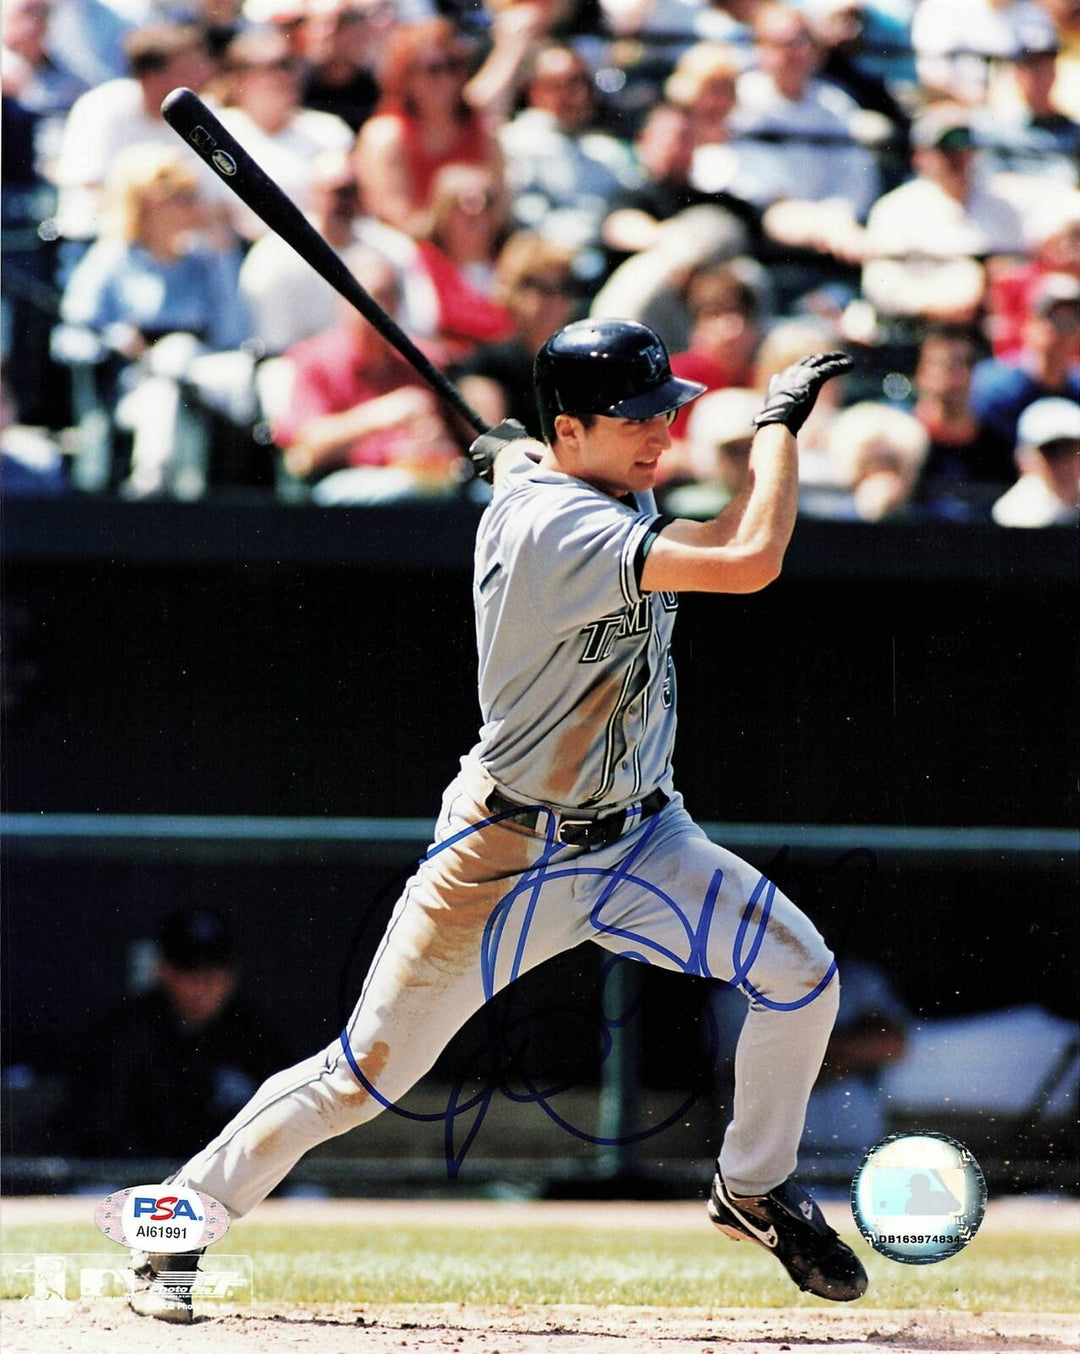 ROCCO BALDELLI signed 8x10 photo PSA/DNA Autographed Tampa Bay Rays Image 1